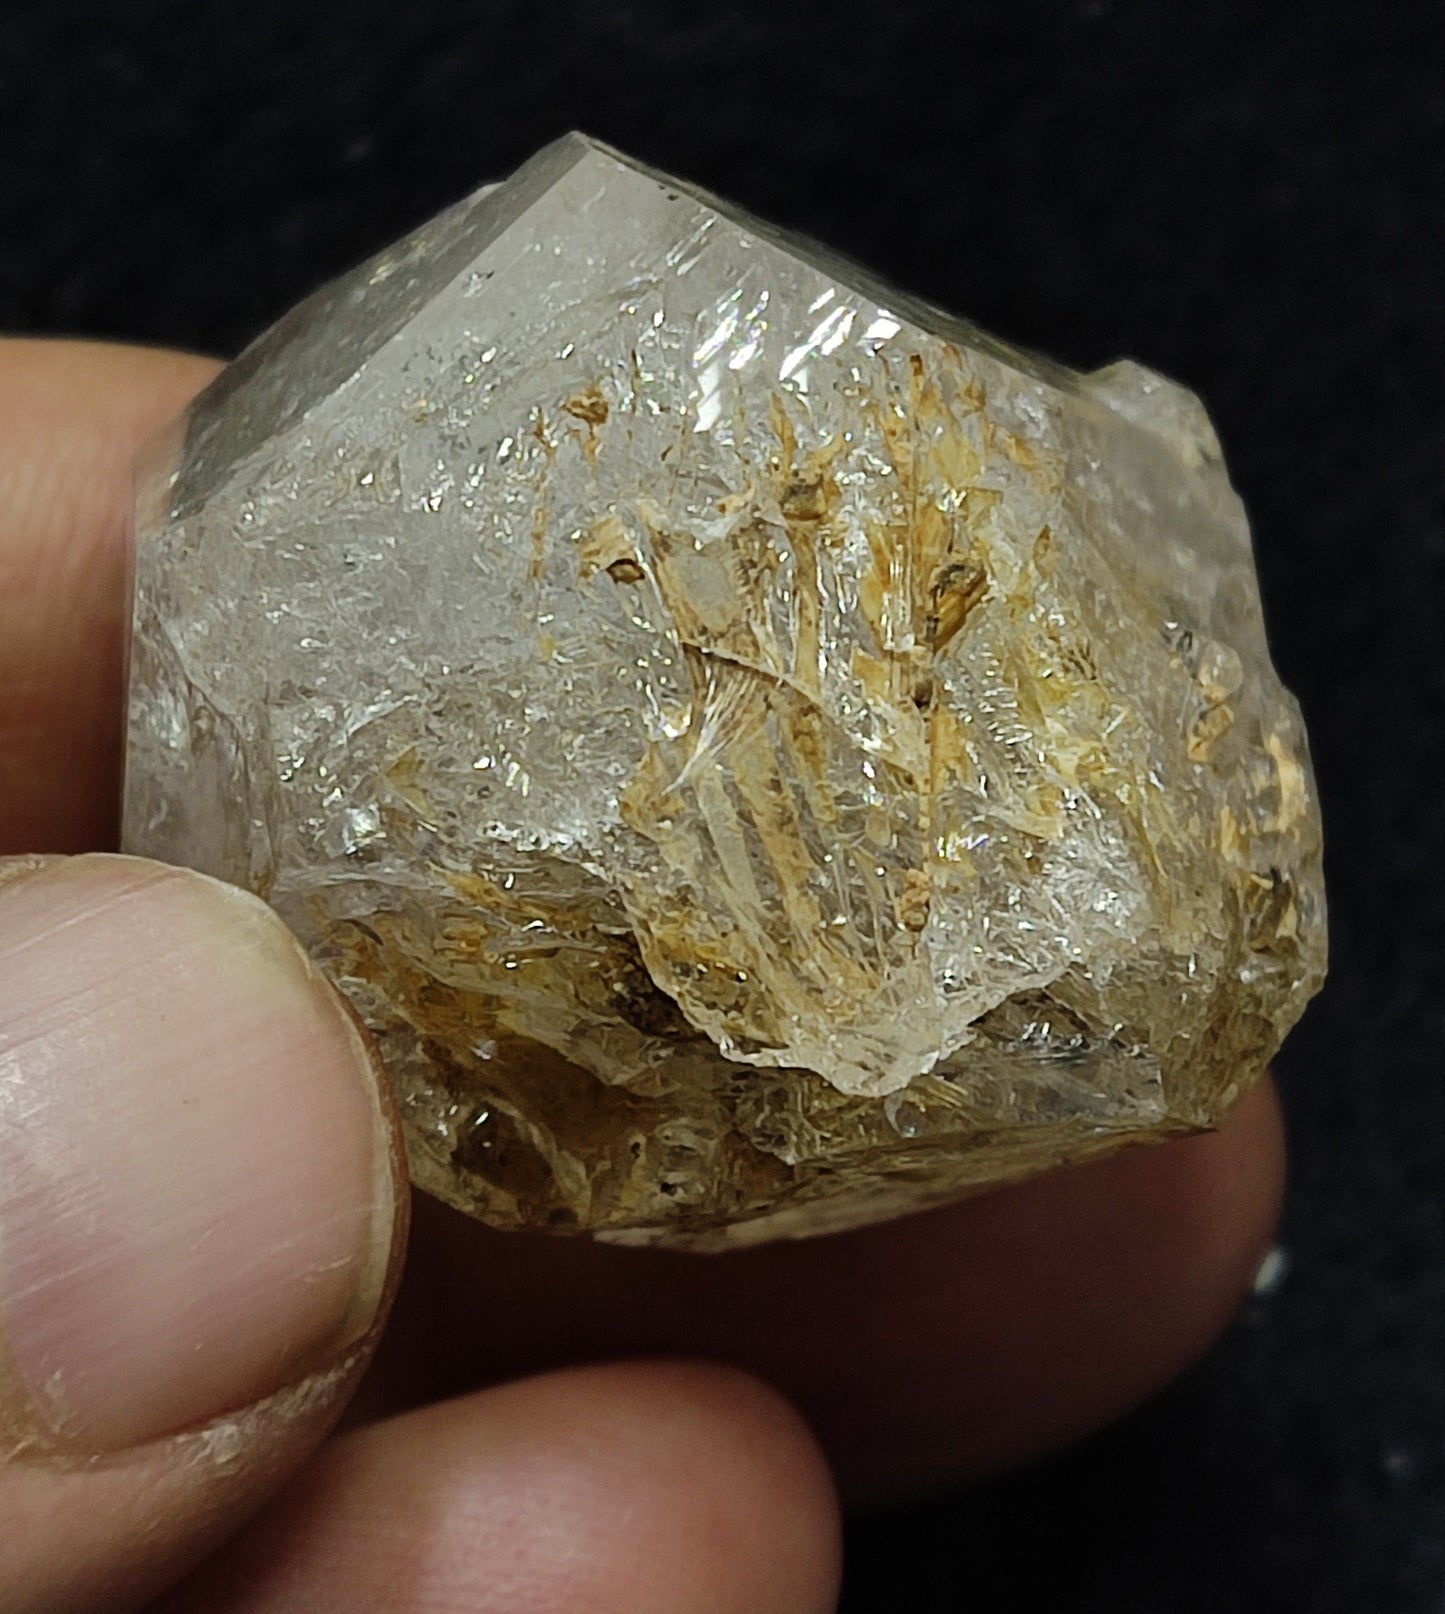 Fenster window Quartz Crystal with clay inclusions 42 grams